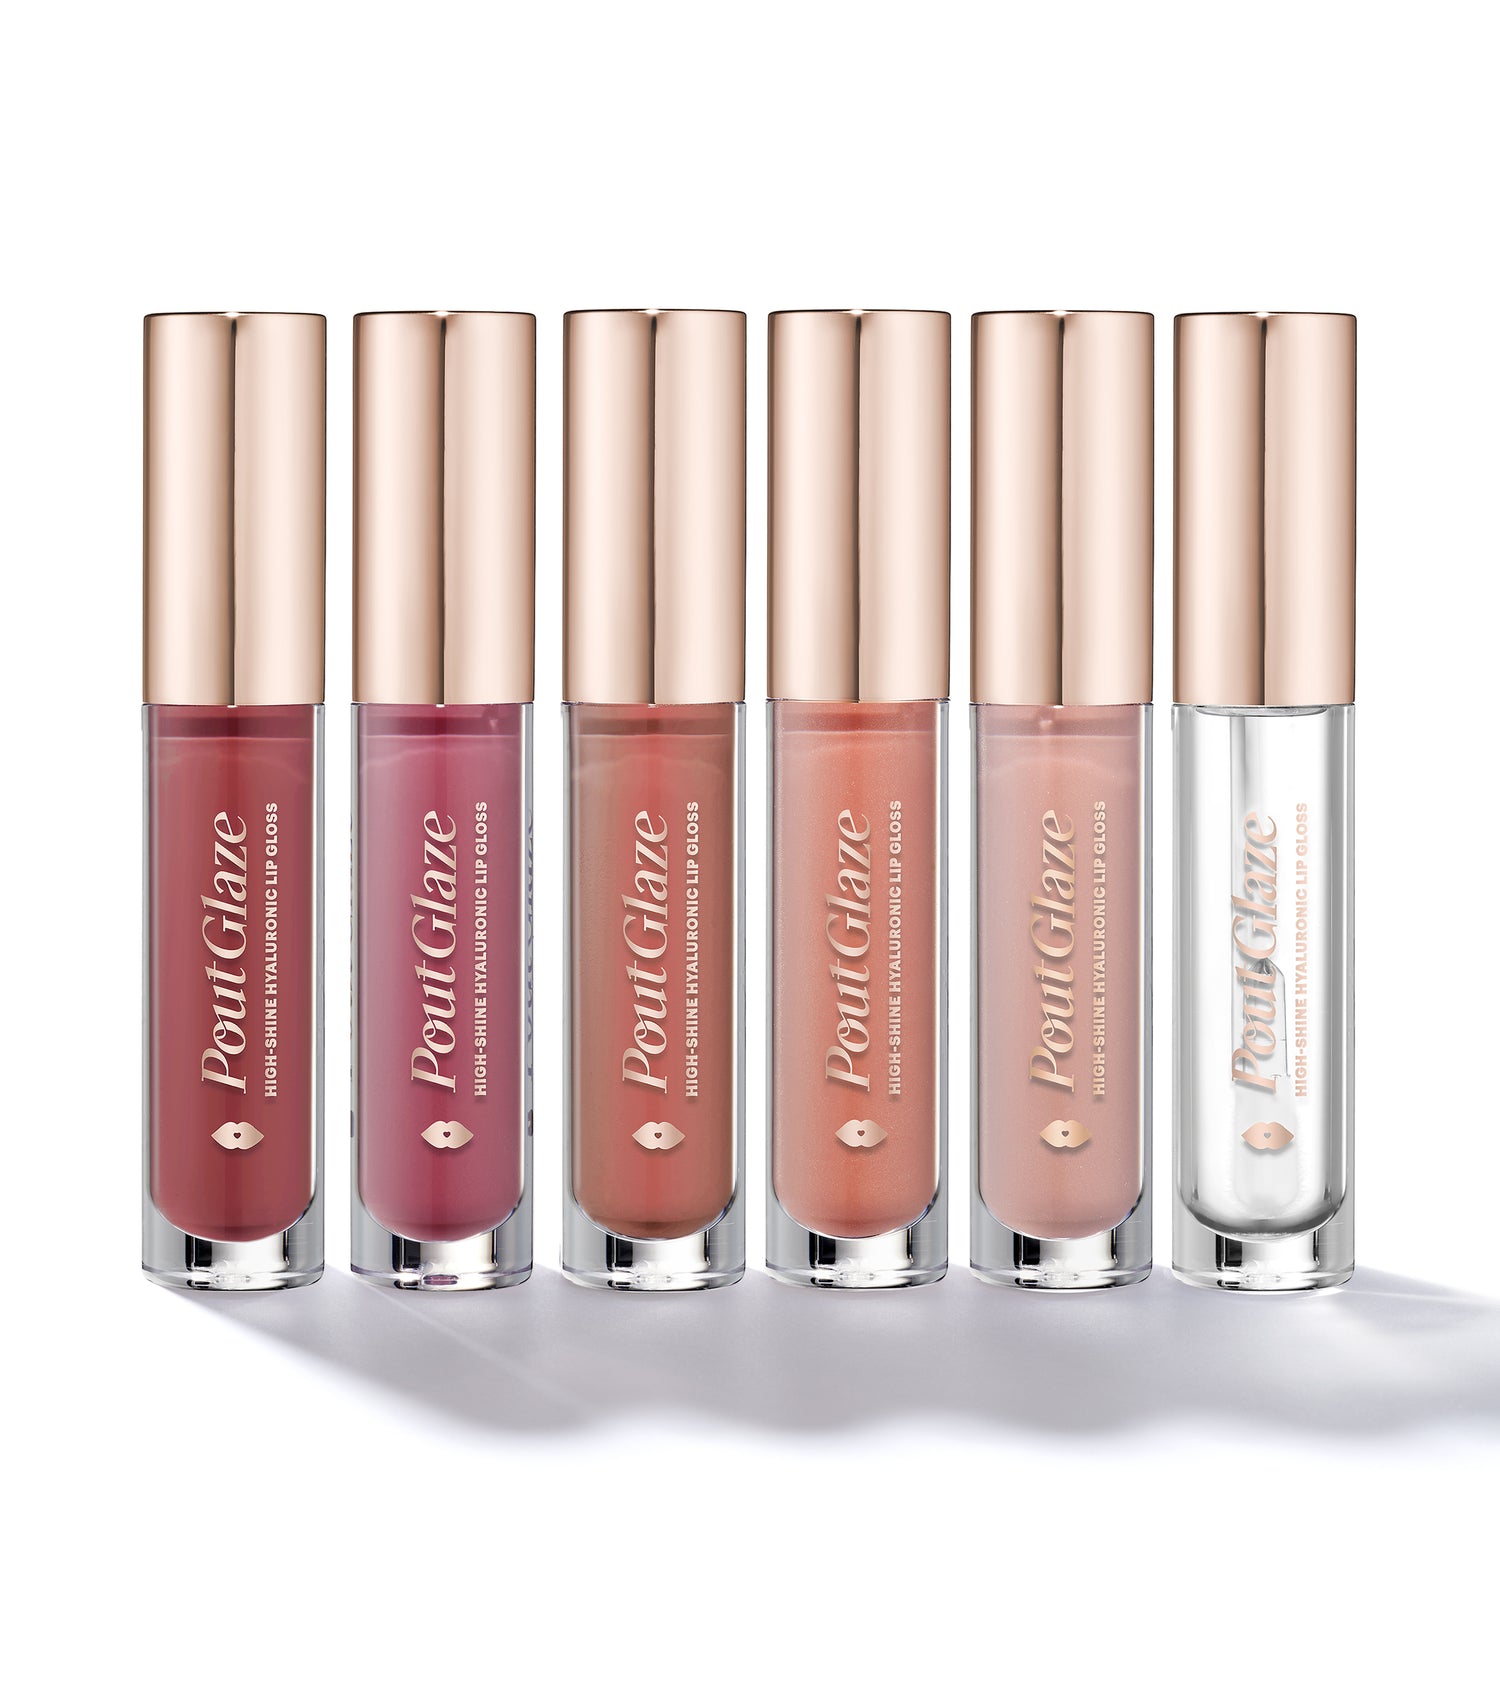 Pout Glaze High-Shine Hyaluronic Lip Gloss (Gailey) Main Image featured